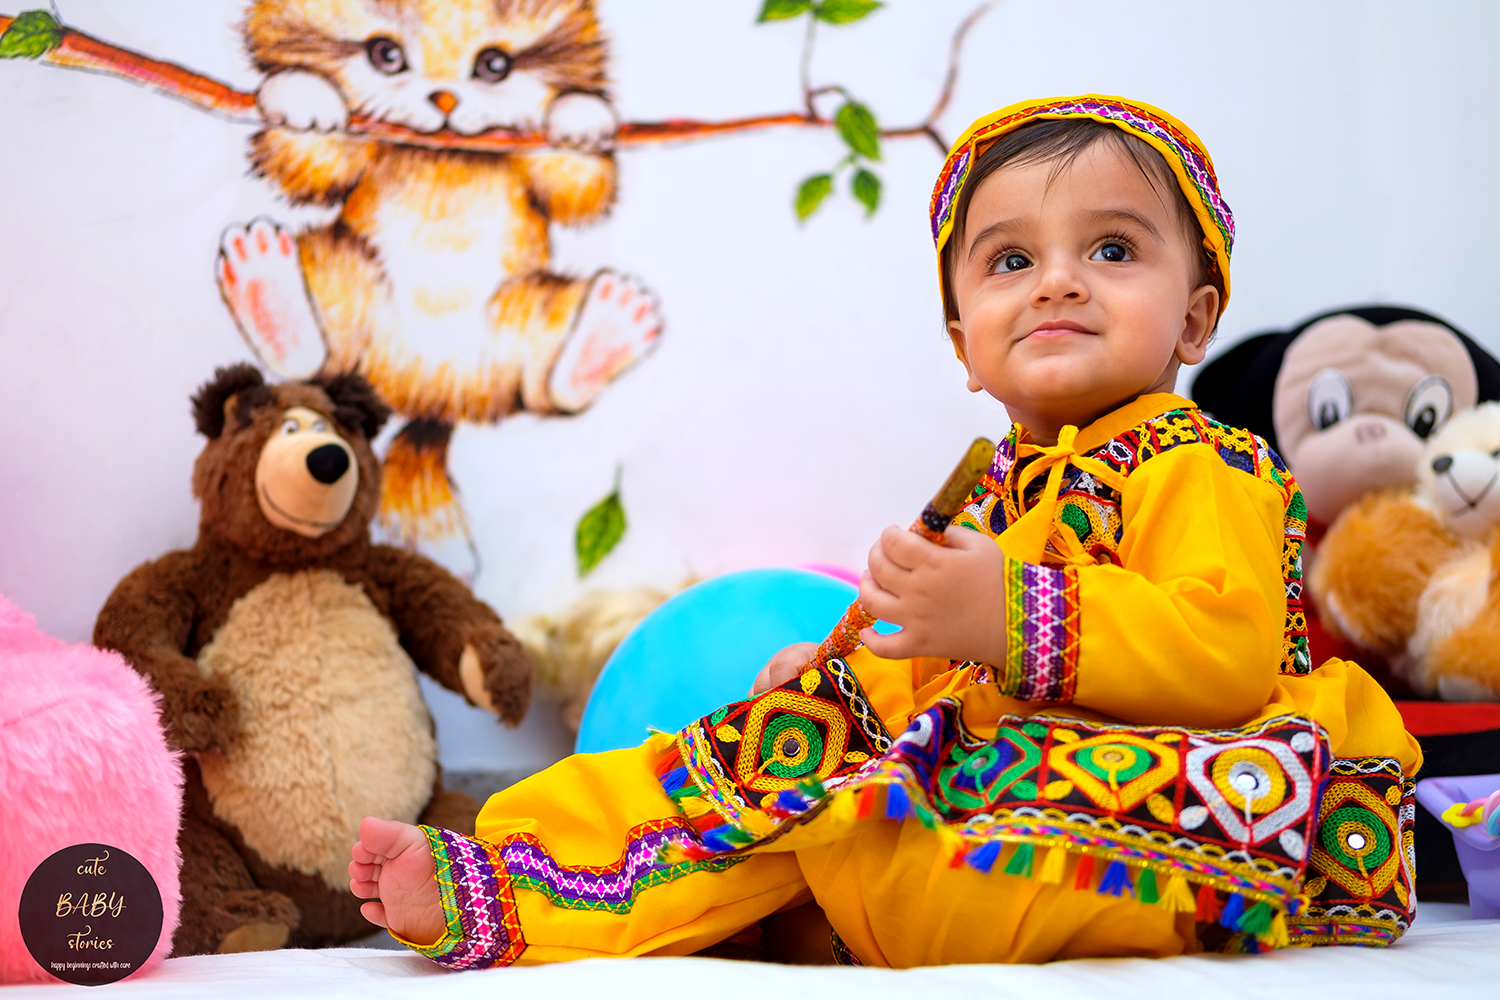 Baby Photographers in Durgapur, Baby Photographers in Kolkata, Baby Photographers in Asansol, Baby Photography, New Born Photography, Pre Birthday Photography, One Year Photography